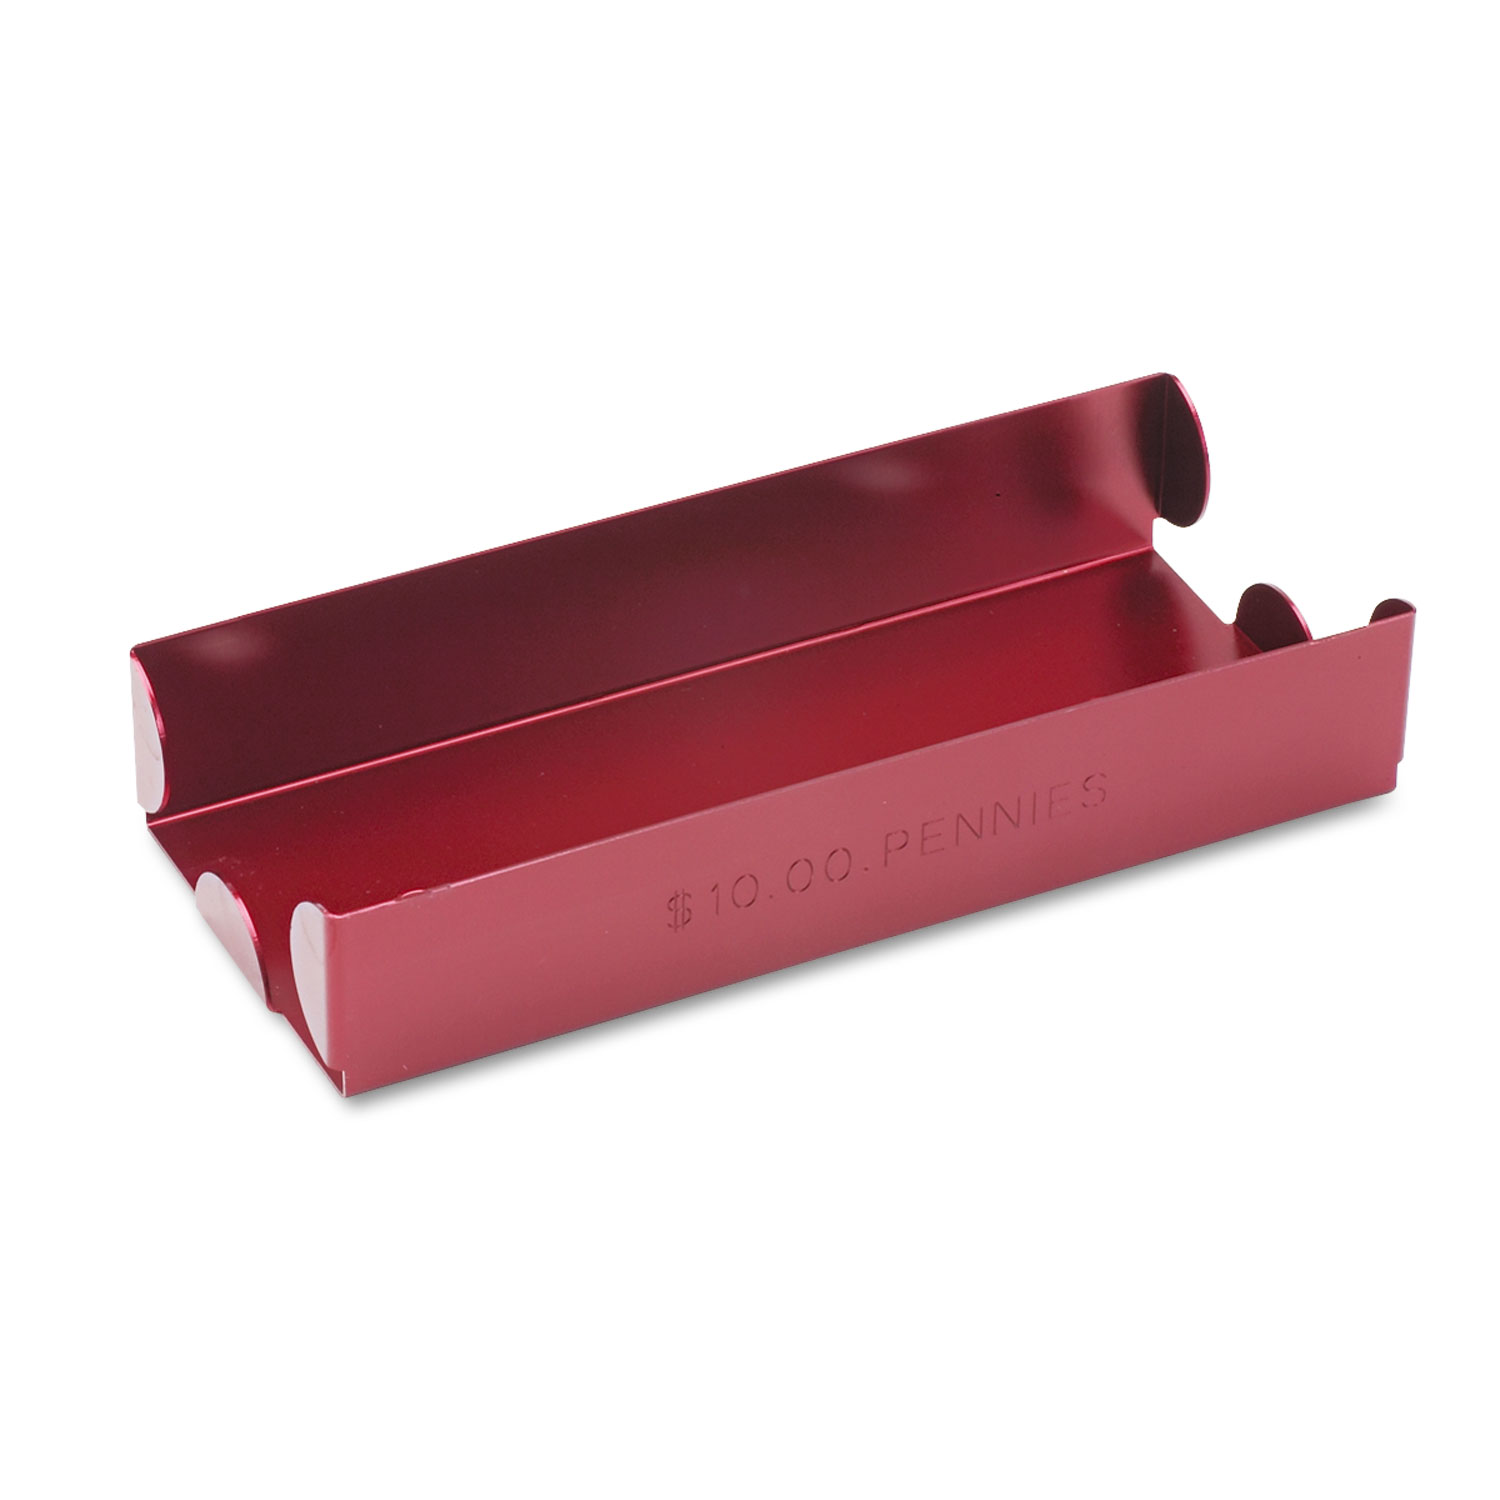  MMF Industries 211010107 Rolled Coin Aluminum Tray w/Denomination & Quantity Etched on Side, Red (MMF211010107) 